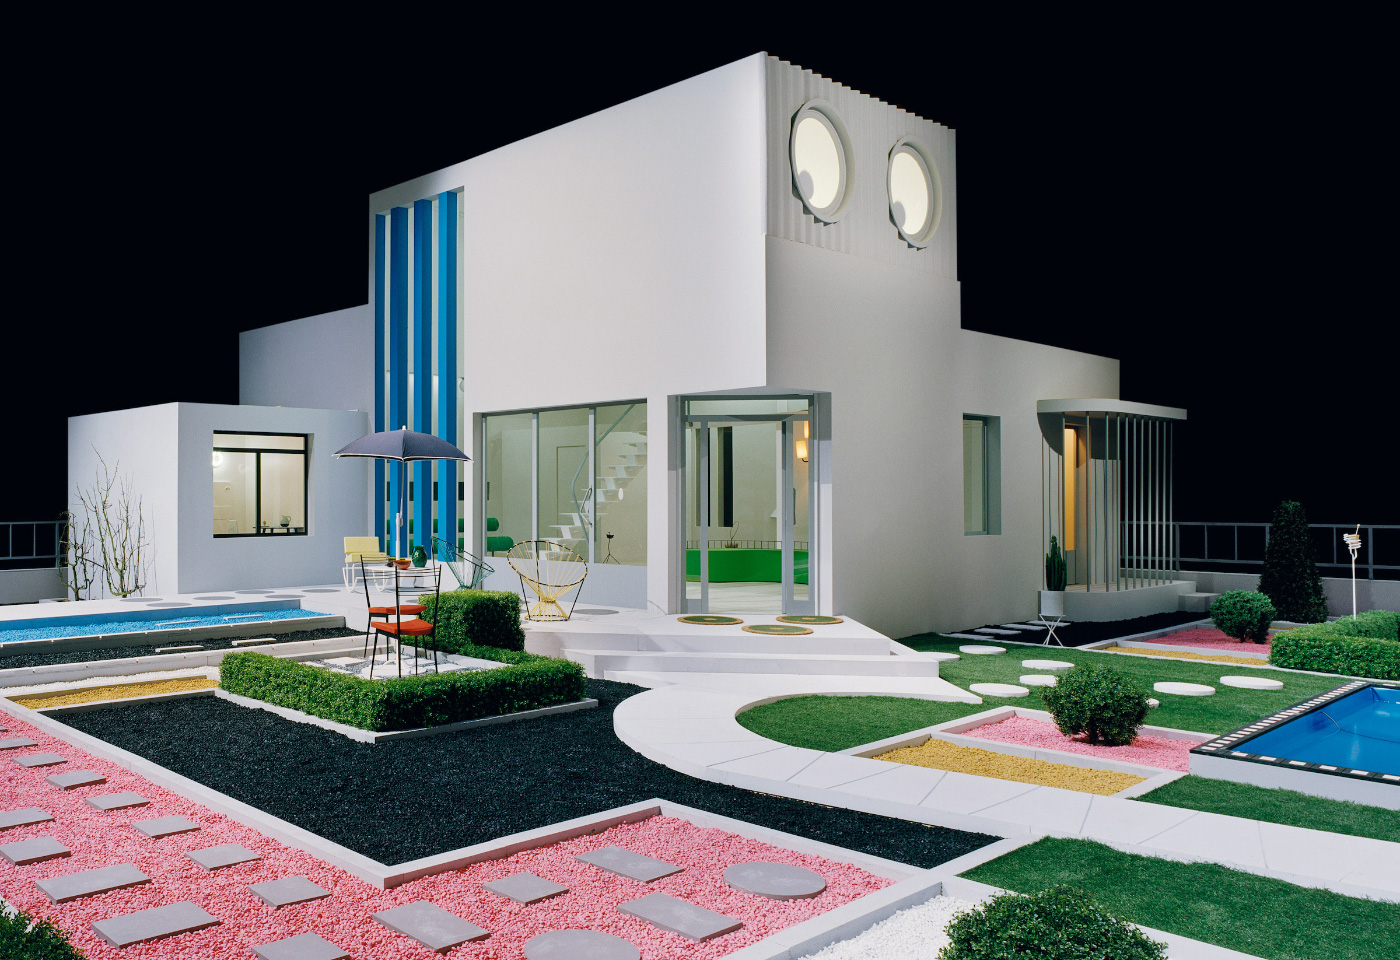 Exterior of a white modernist house from Jacques Tati Mon Oncle film